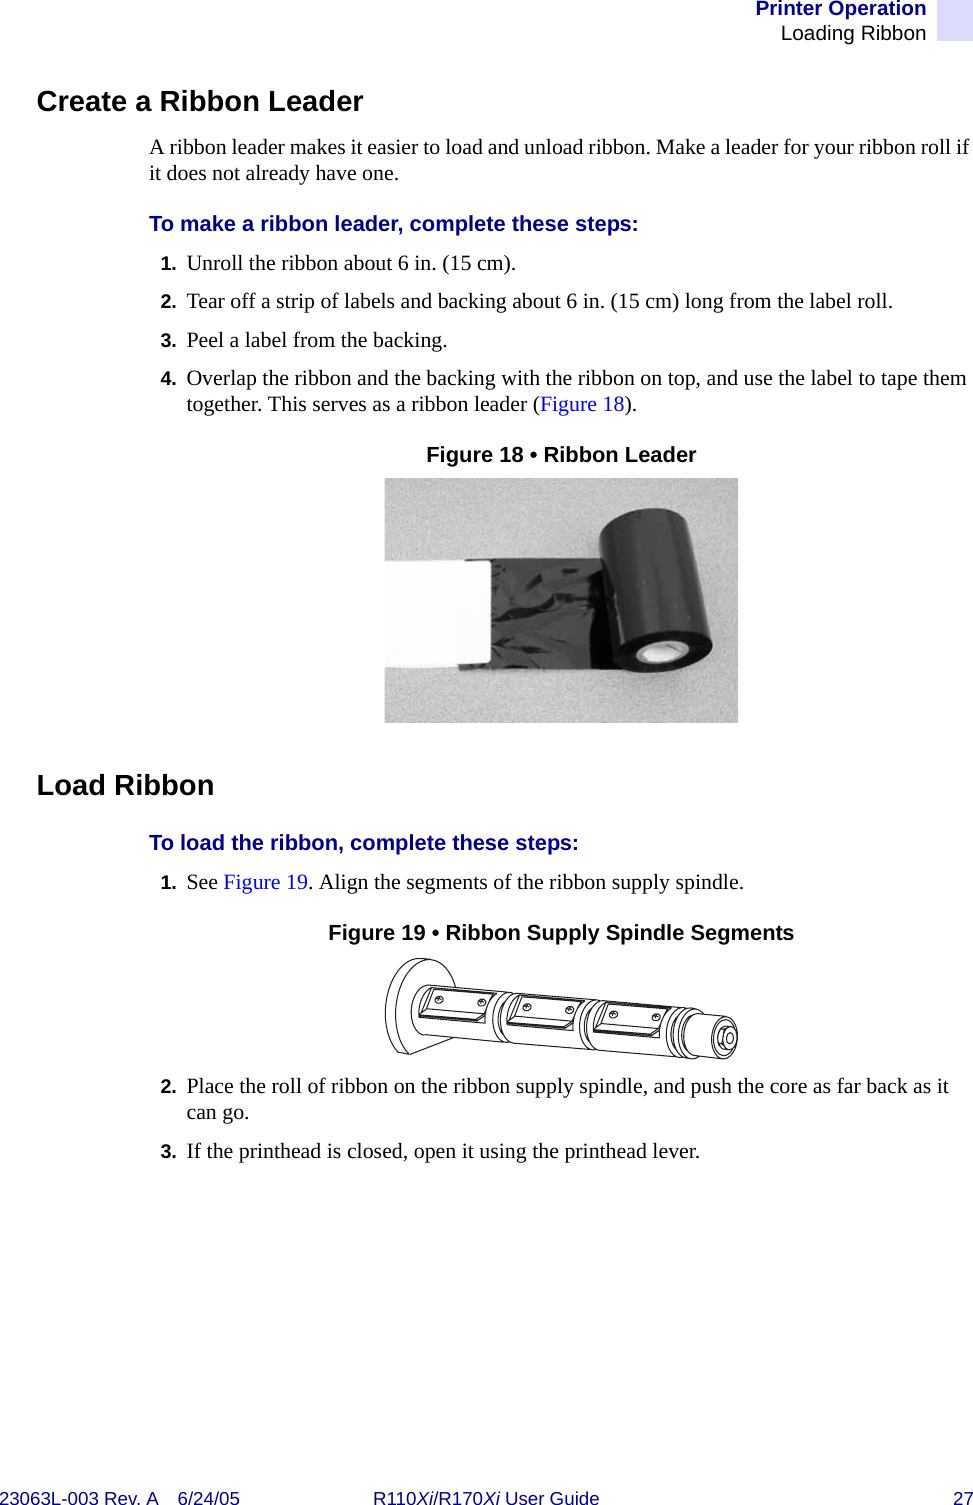 Printer OperationLoading Ribbon23063L-003 Rev. A 6/24/05 R110Xi/R170Xi User Guide 27Create a Ribbon LeaderA ribbon leader makes it easier to load and unload ribbon. Make a leader for your ribbon roll if it does not already have one.To make a ribbon leader, complete these steps:1. Unroll the ribbon about 6 in. (15 cm).2. Tear off a strip of labels and backing about 6 in. (15 cm) long from the label roll.3. Peel a label from the backing.4. Overlap the ribbon and the backing with the ribbon on top, and use the label to tape them together. This serves as a ribbon leader (Figure 18).Figure 18 • Ribbon LeaderLoad RibbonTo load the ribbon, complete these steps:1. See Figure 19. Align the segments of the ribbon supply spindle.Figure 19 • Ribbon Supply Spindle Segments2. Place the roll of ribbon on the ribbon supply spindle, and push the core as far back as it can go.3. If the printhead is closed, open it using the printhead lever.